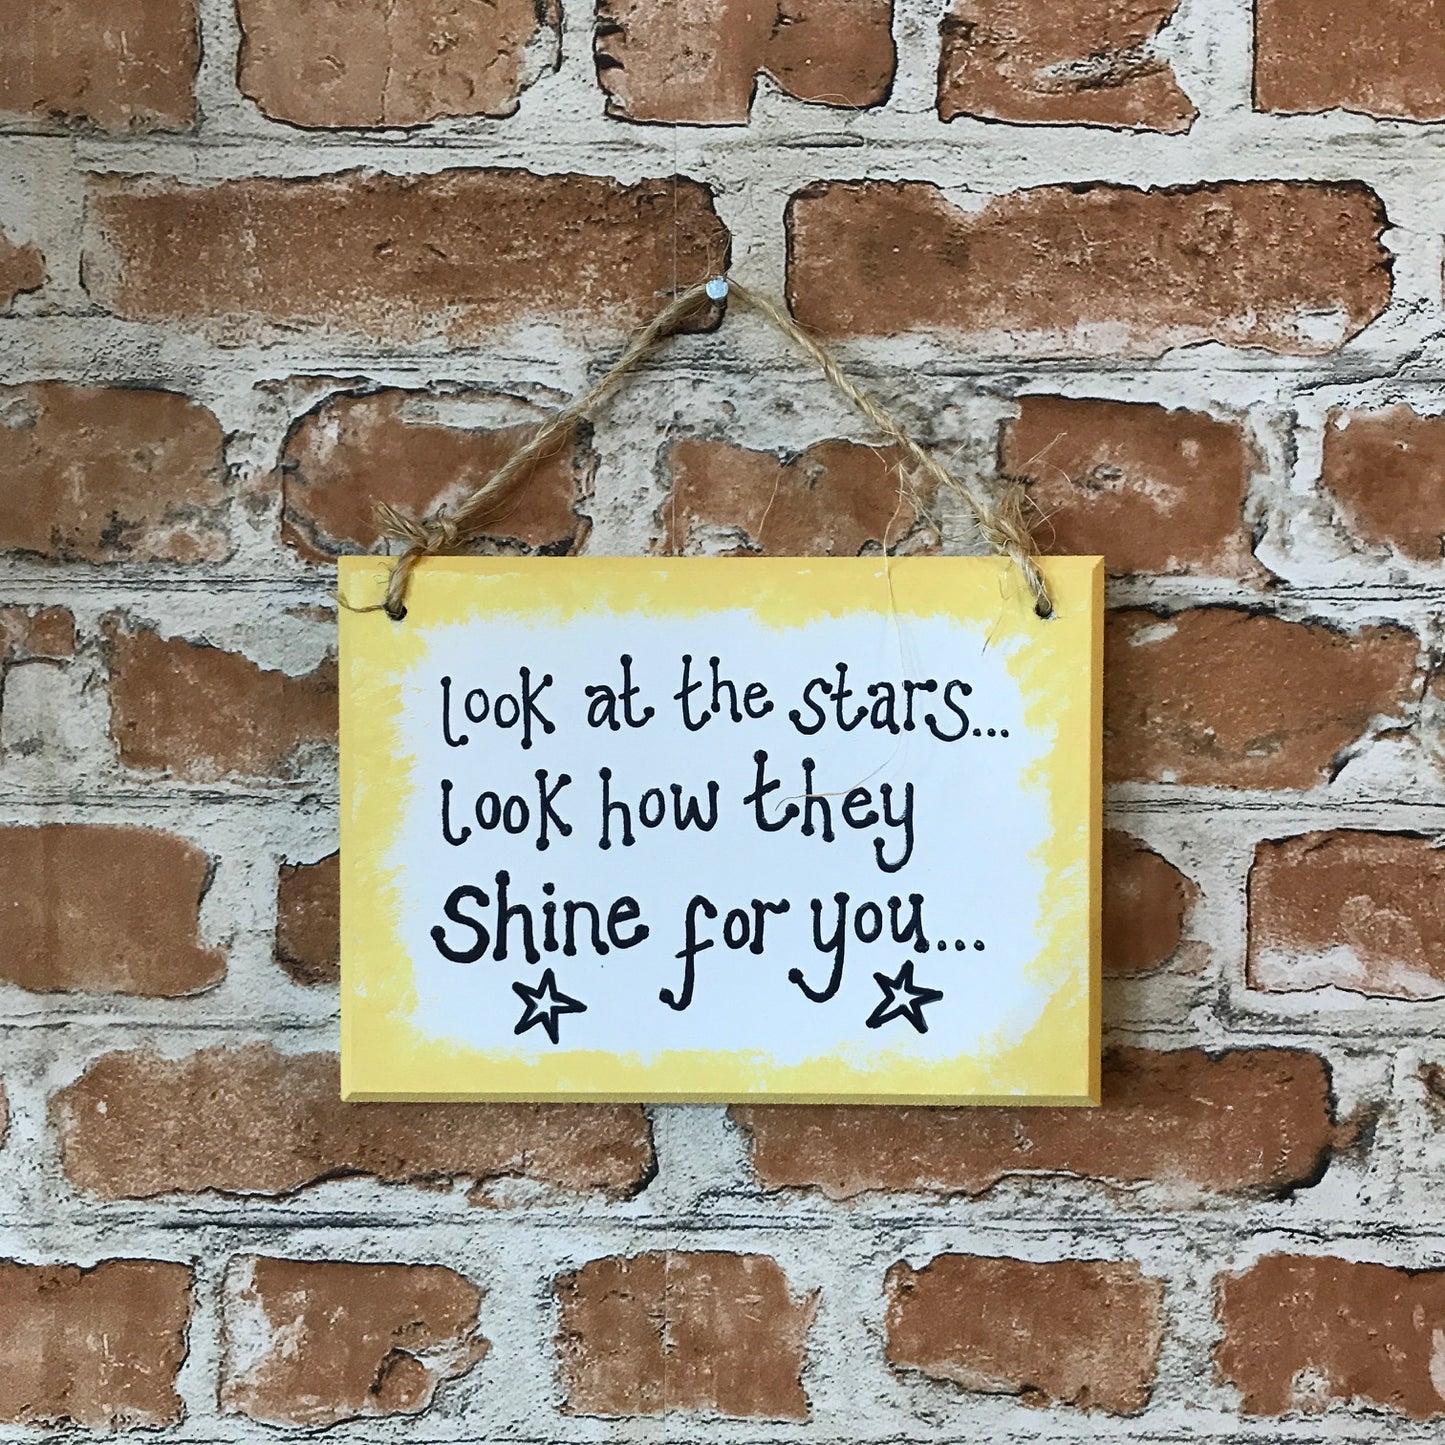 Look at the stars, look how they shine for you - Handmade Wooden Plaque from The Wrong End of Town